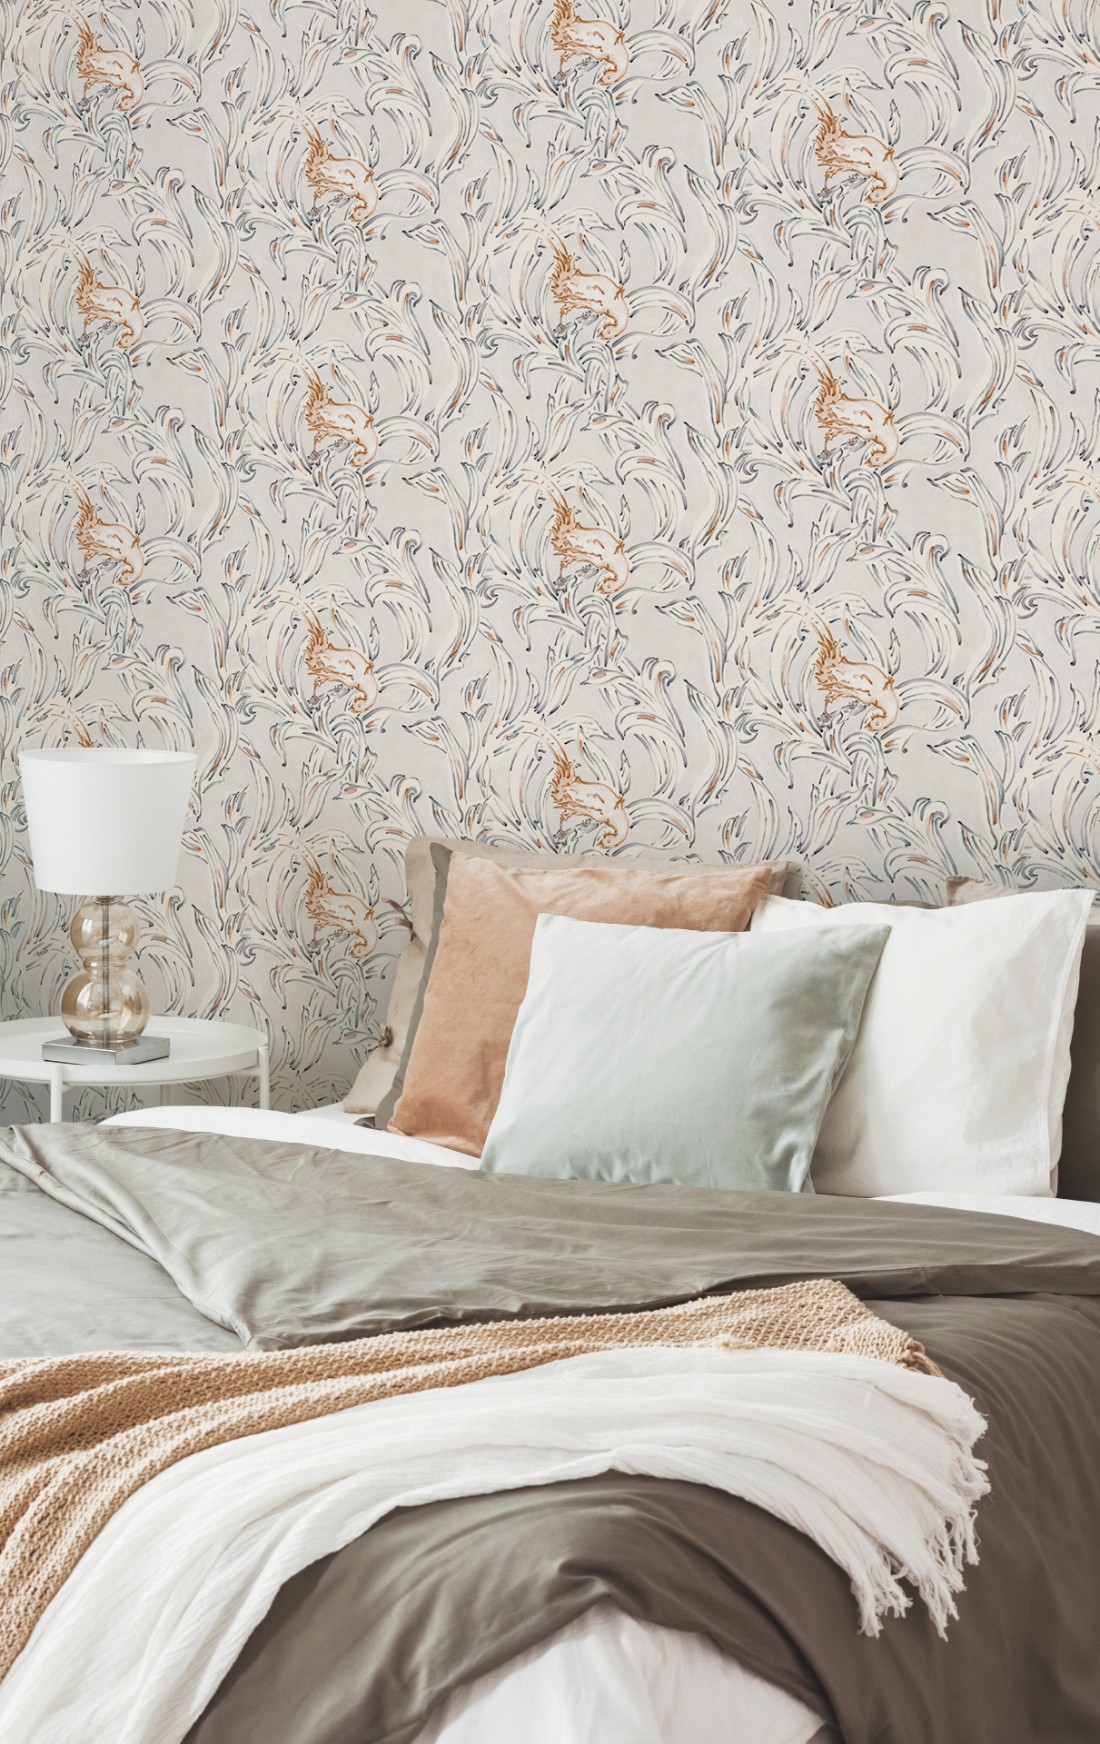 Salmon pink and light grey bedding with soft patterned bedroom wallpaper and white side lamp